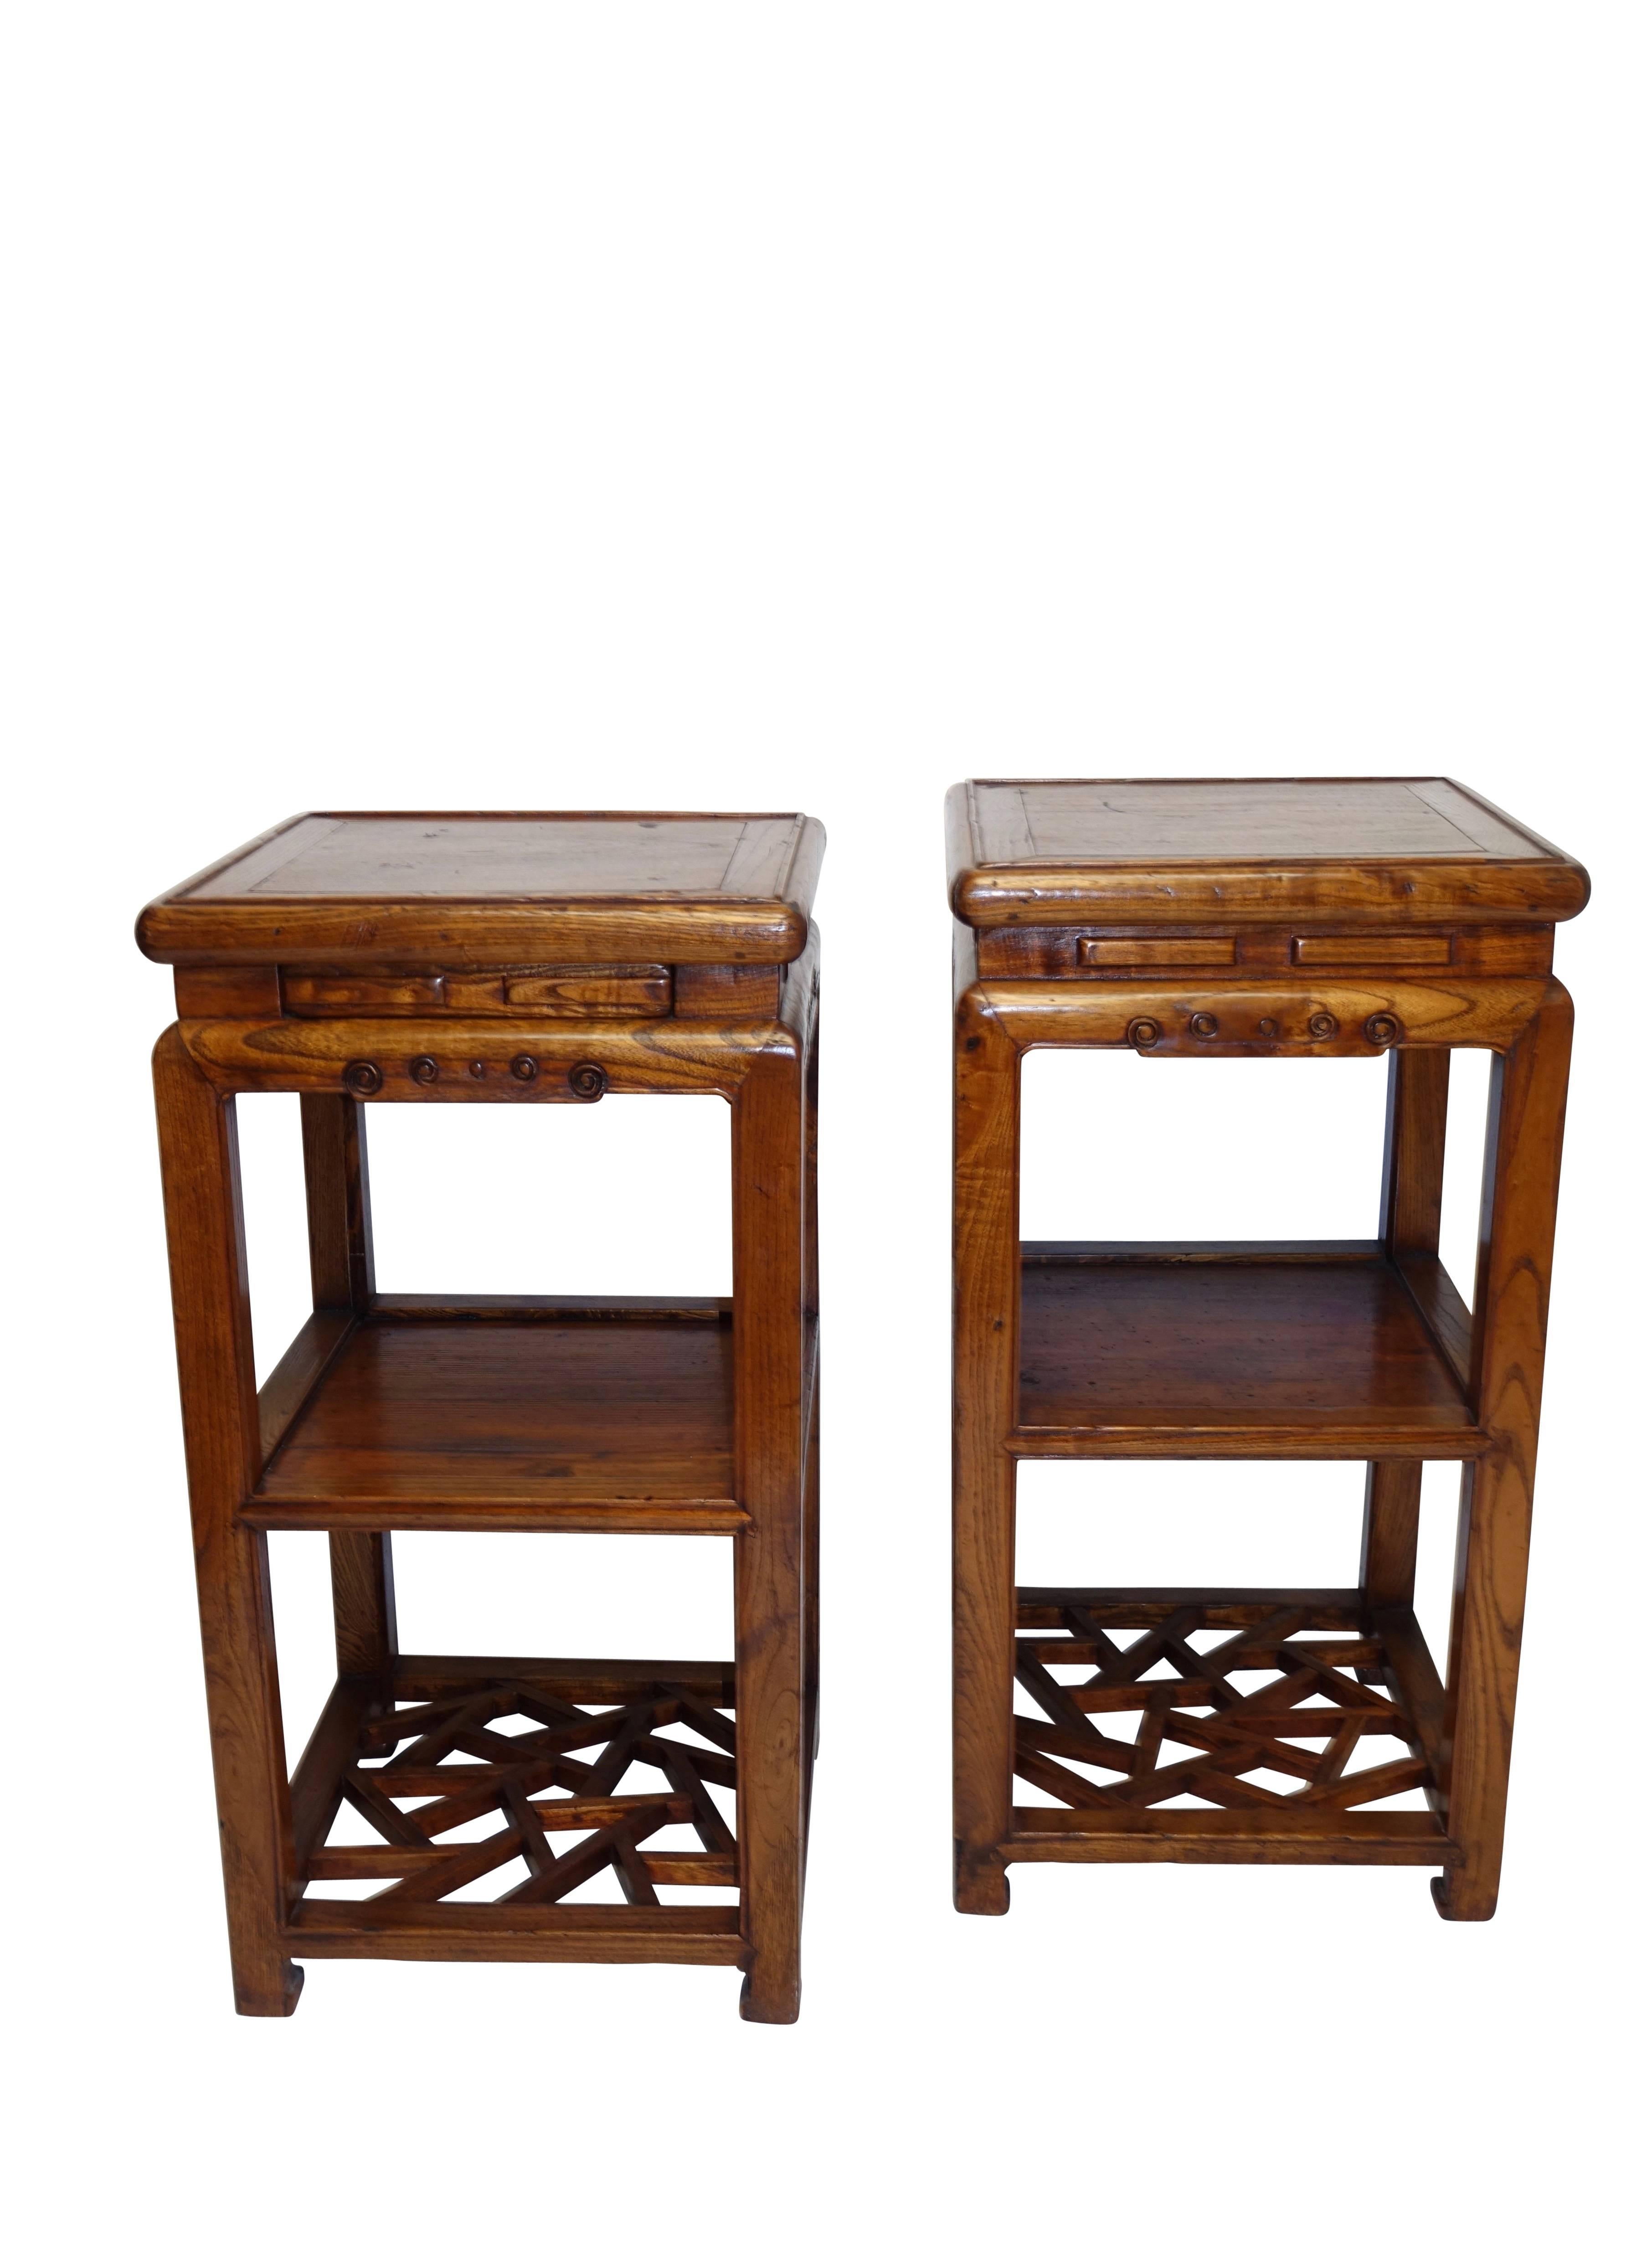 Chinese Pair of Qing Dynasty Two-Tier Stands with Hidden Drawers